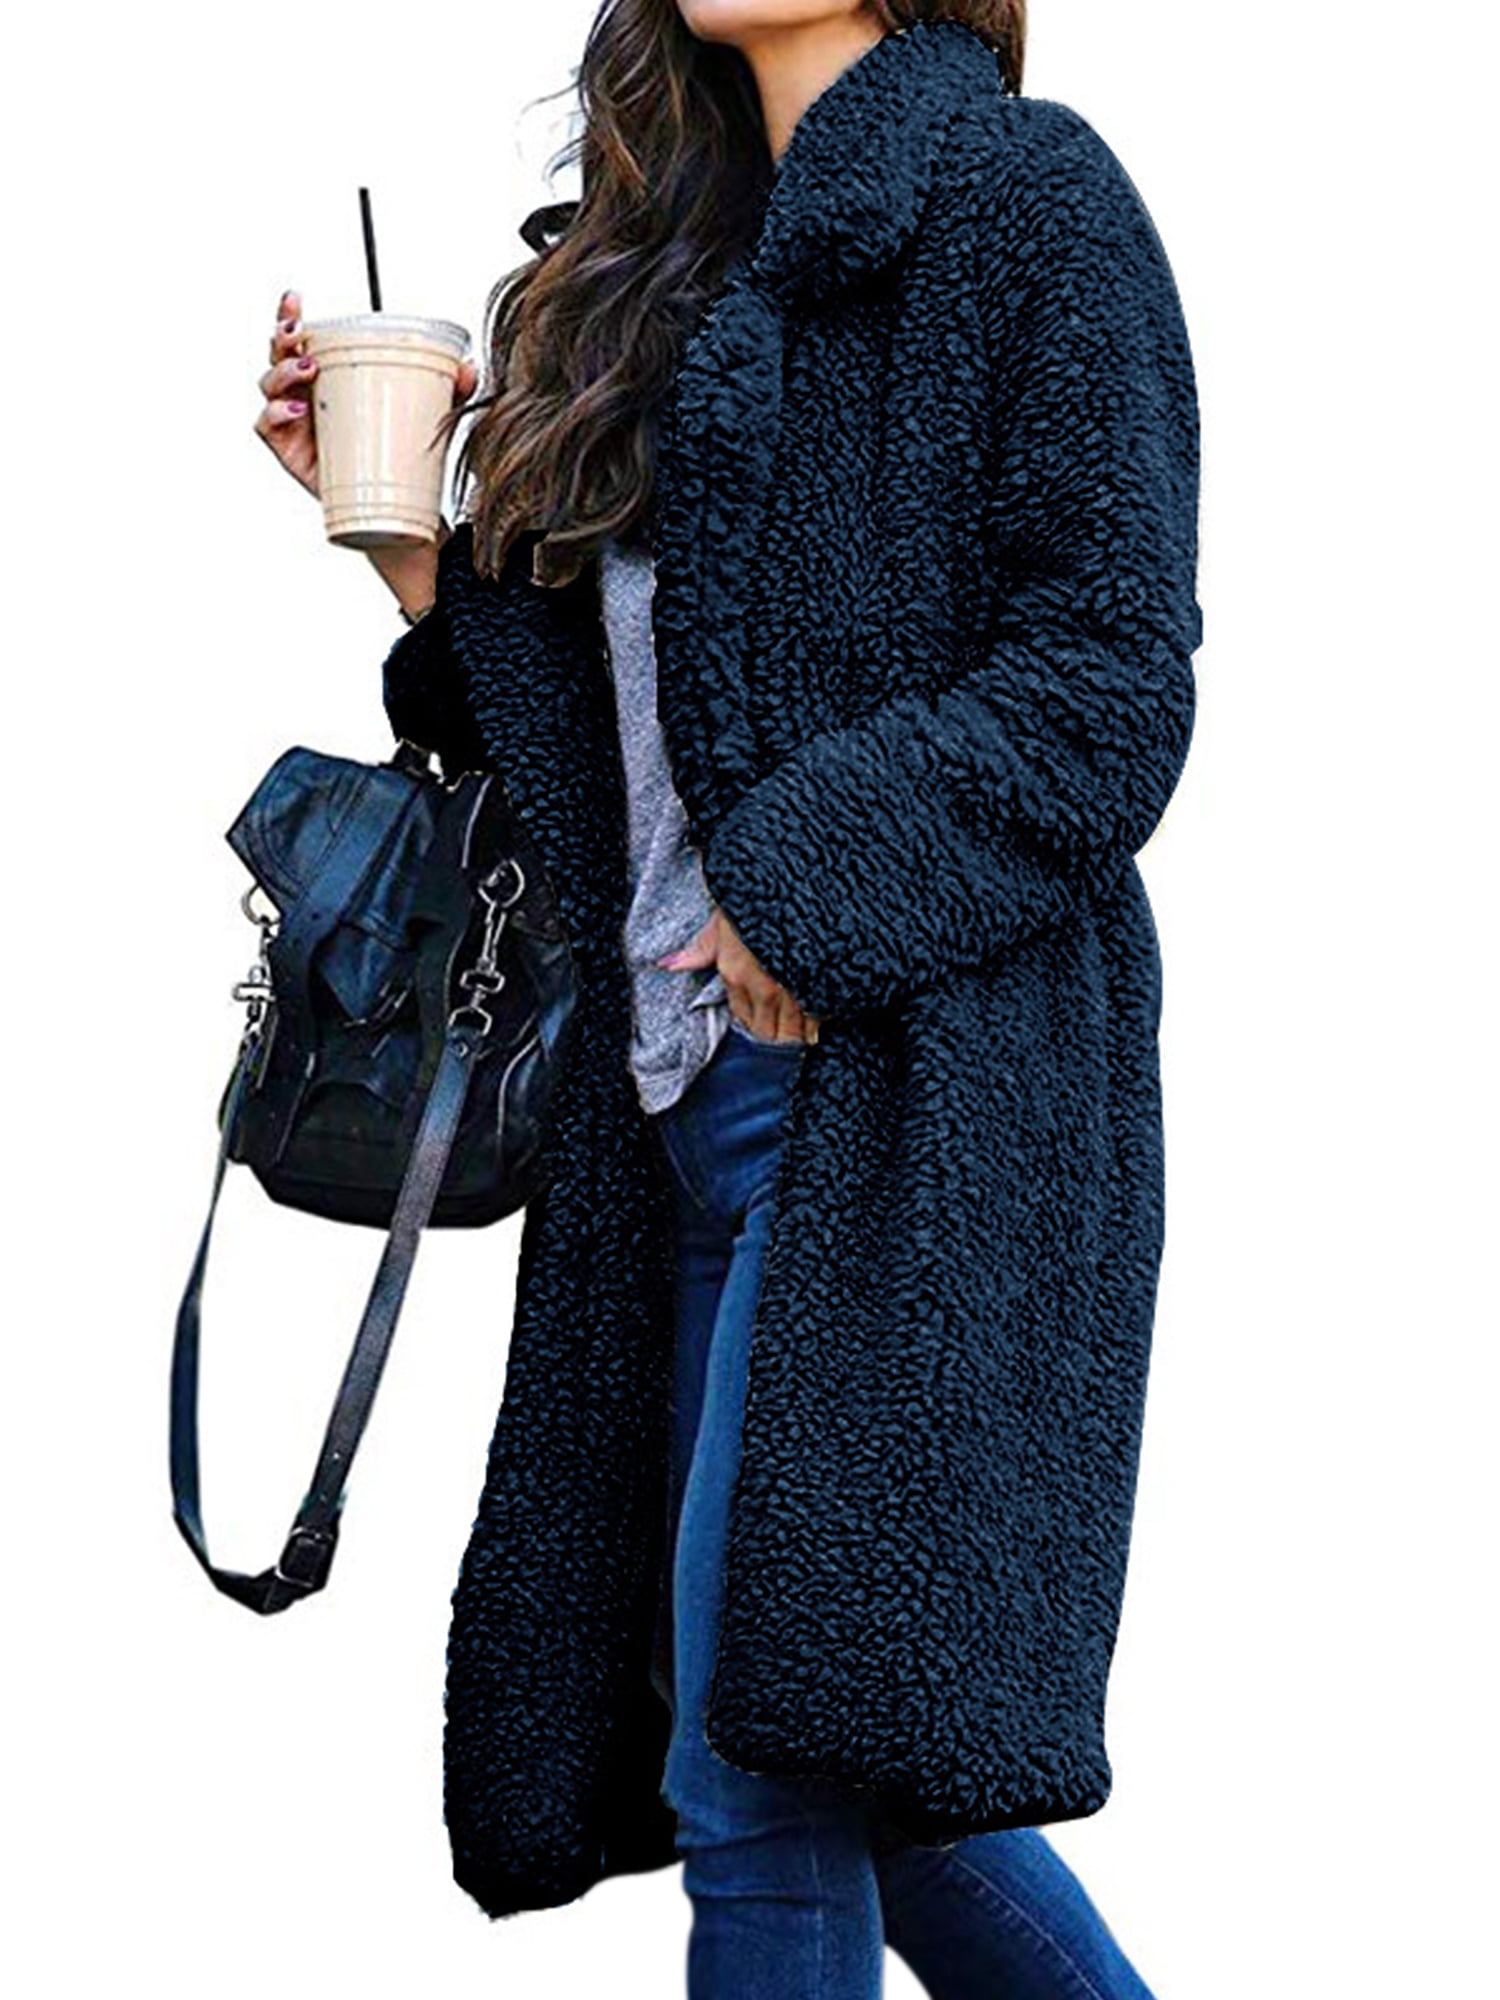 Womens Winter Fashion Fuzzy Long Sleeve Patchwork Hooded Vintage Slim Dress Party Dress Coat 